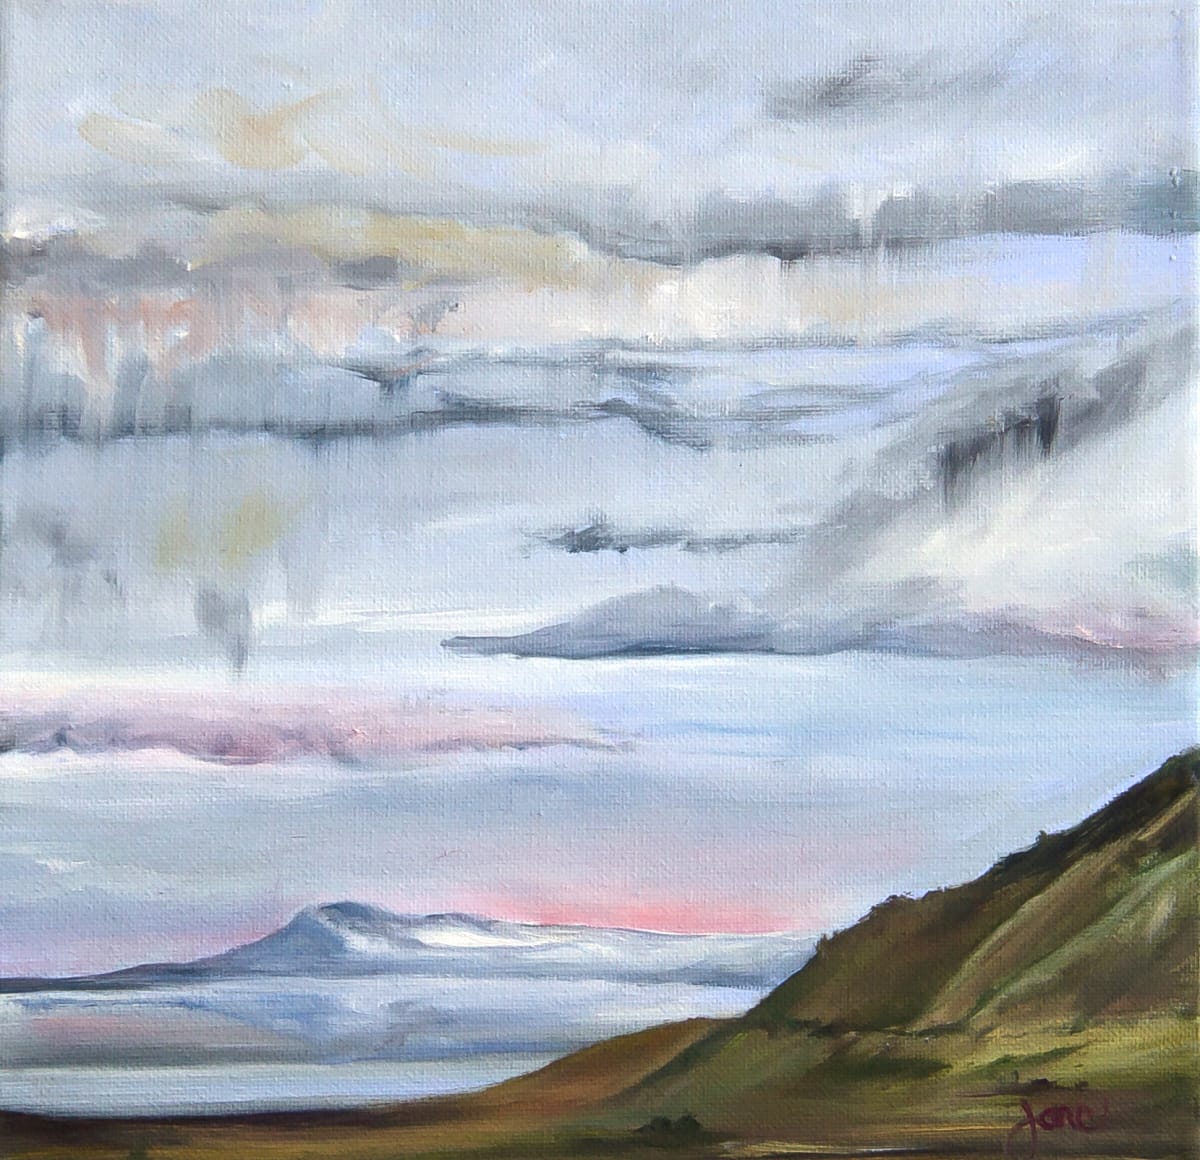 Pink by Nila Jane Autry  Image: Plein air...everytime I looked up the sky had changed, so I just kept painting what I saw, and this is really a montage of clouds and light patterns.